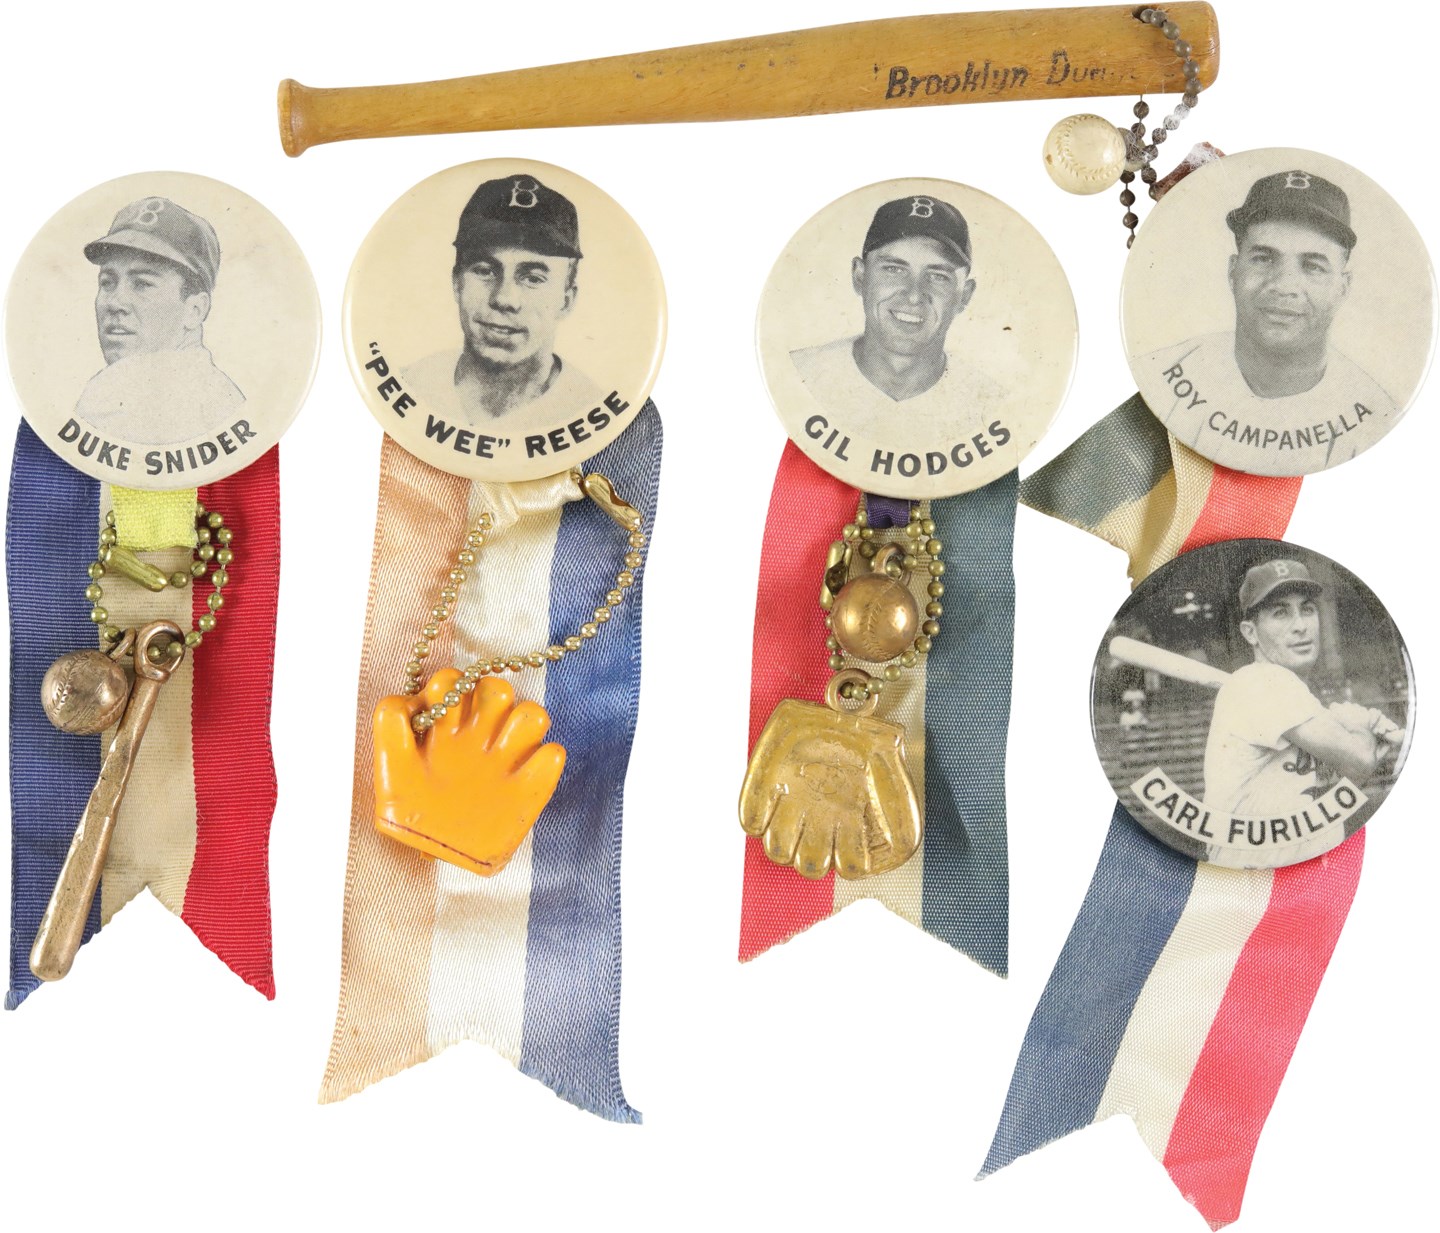 Vintage Brooklyn Dodgers Player Pin Collection (14) - All with Ribbons